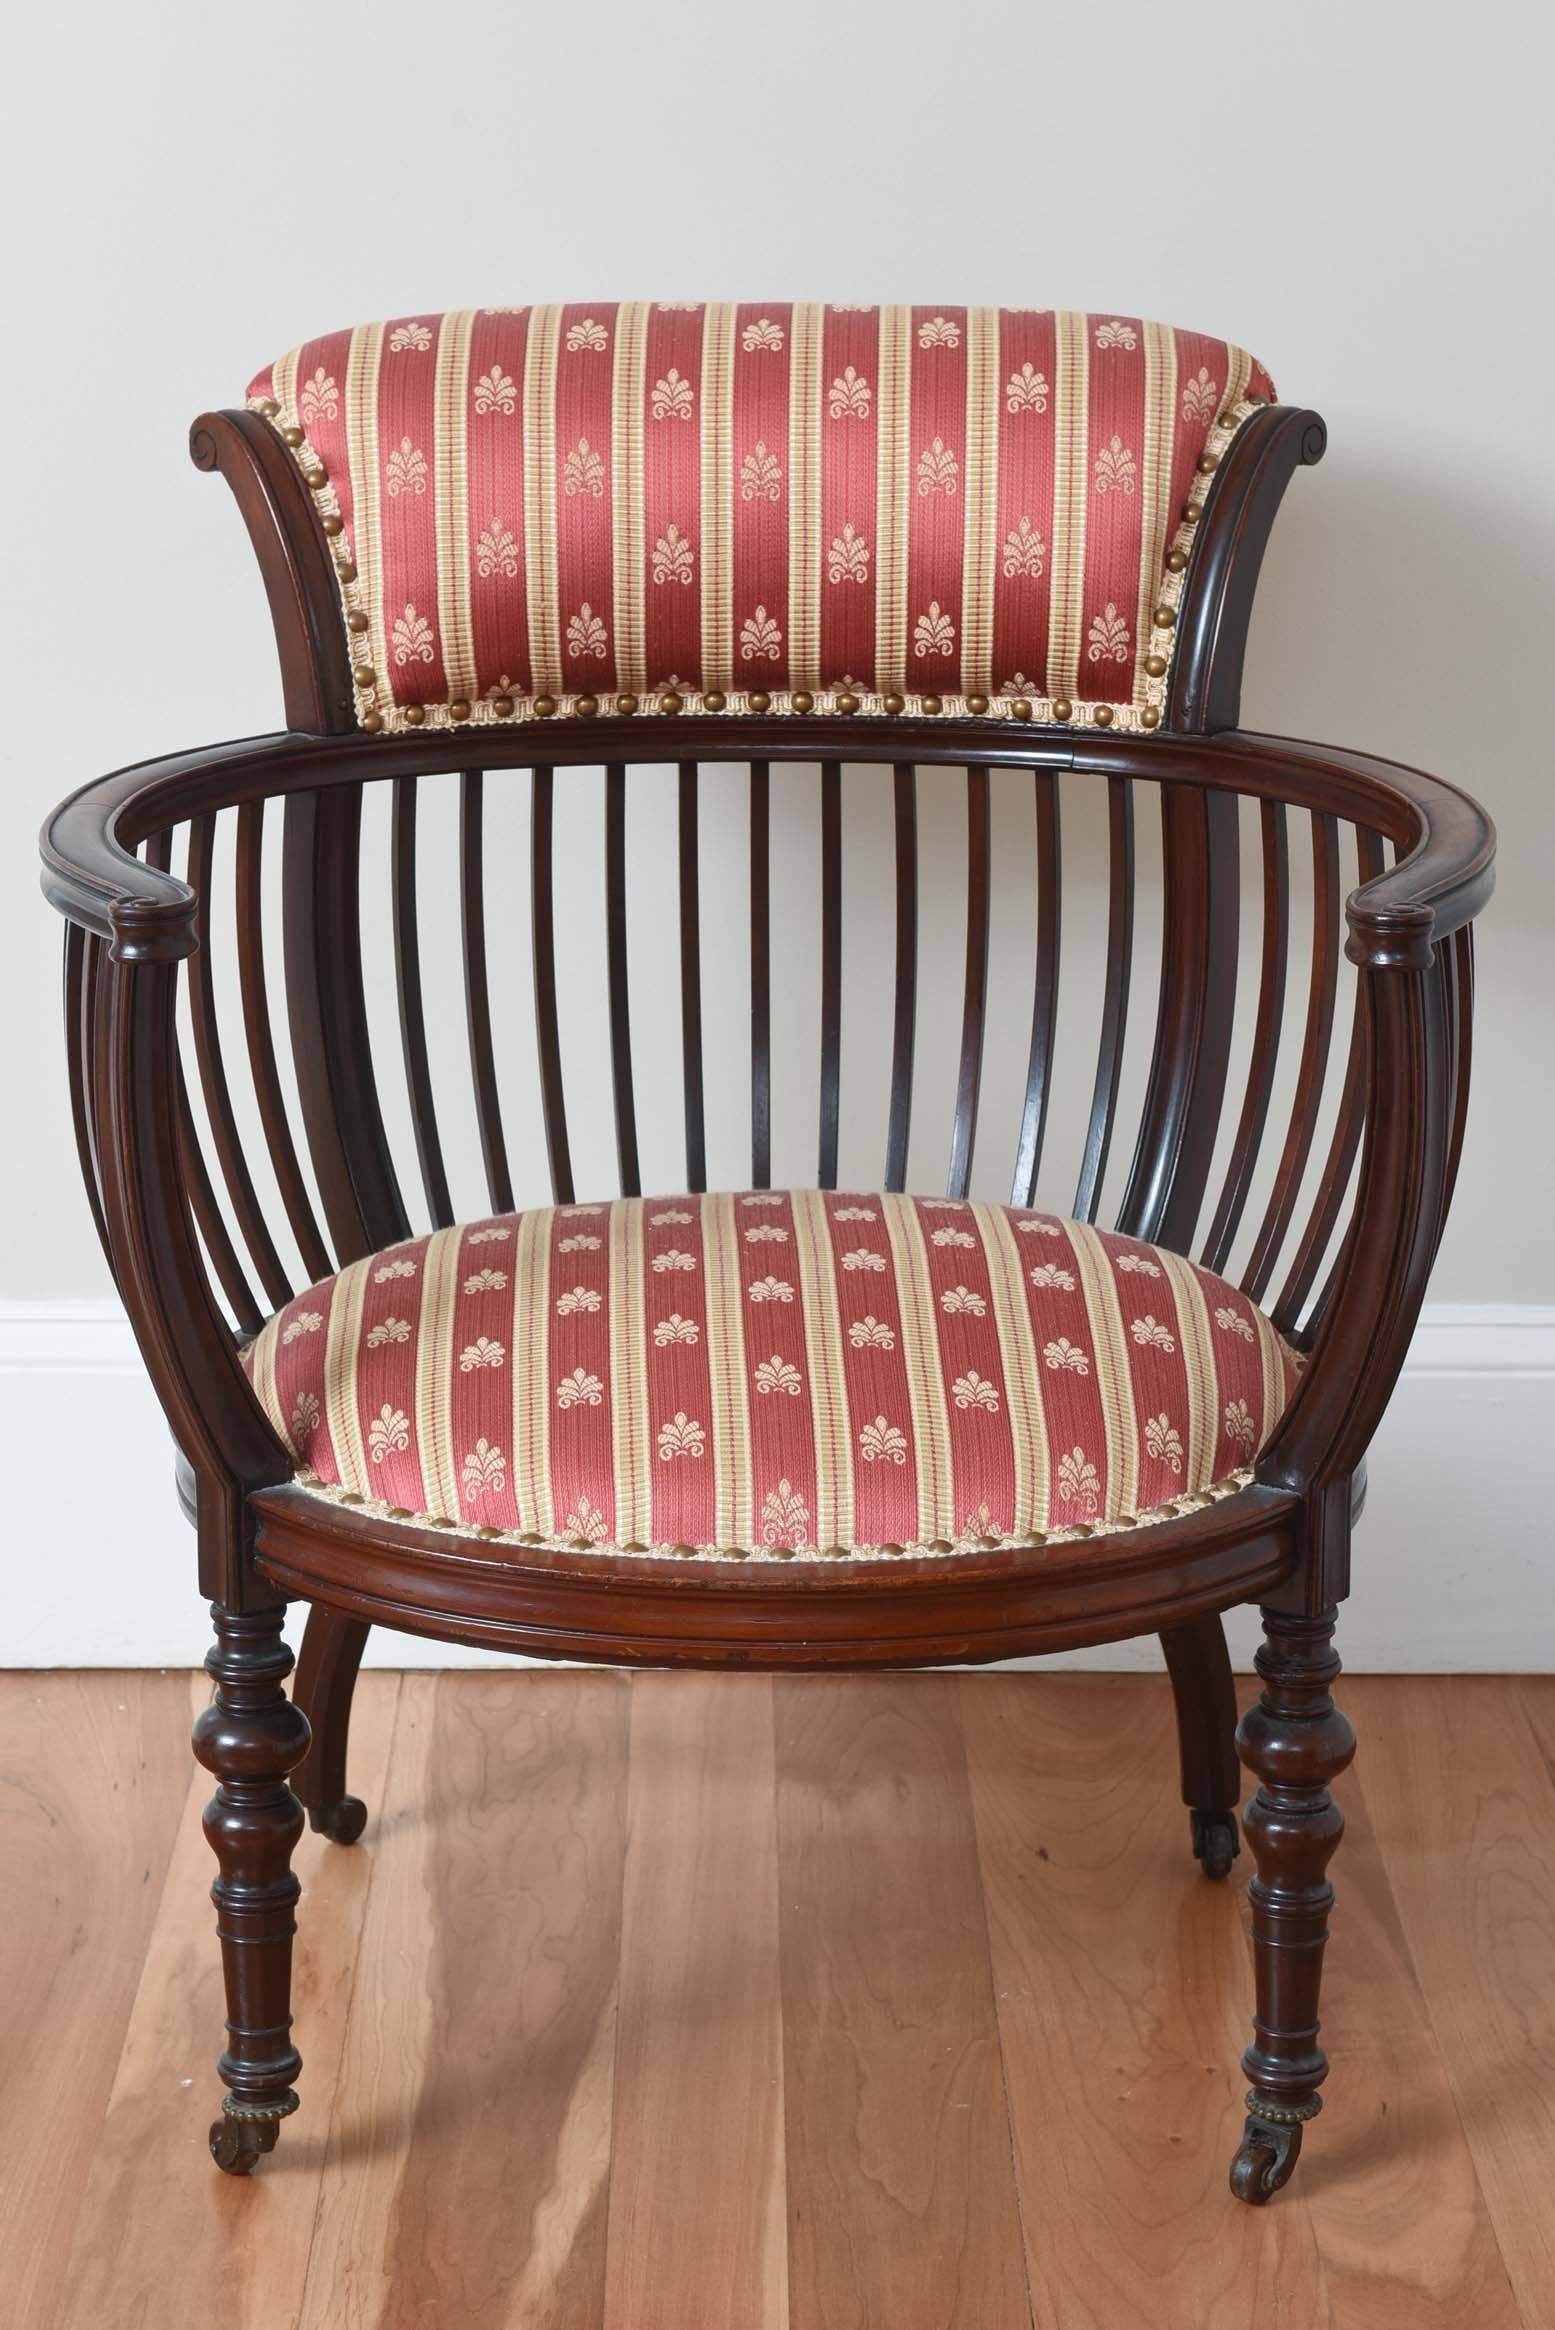 A charming handcrafted chair in wonderful antique condition. Nicely carved legs and well proportioned shape. Retaining its original brass nailheads.